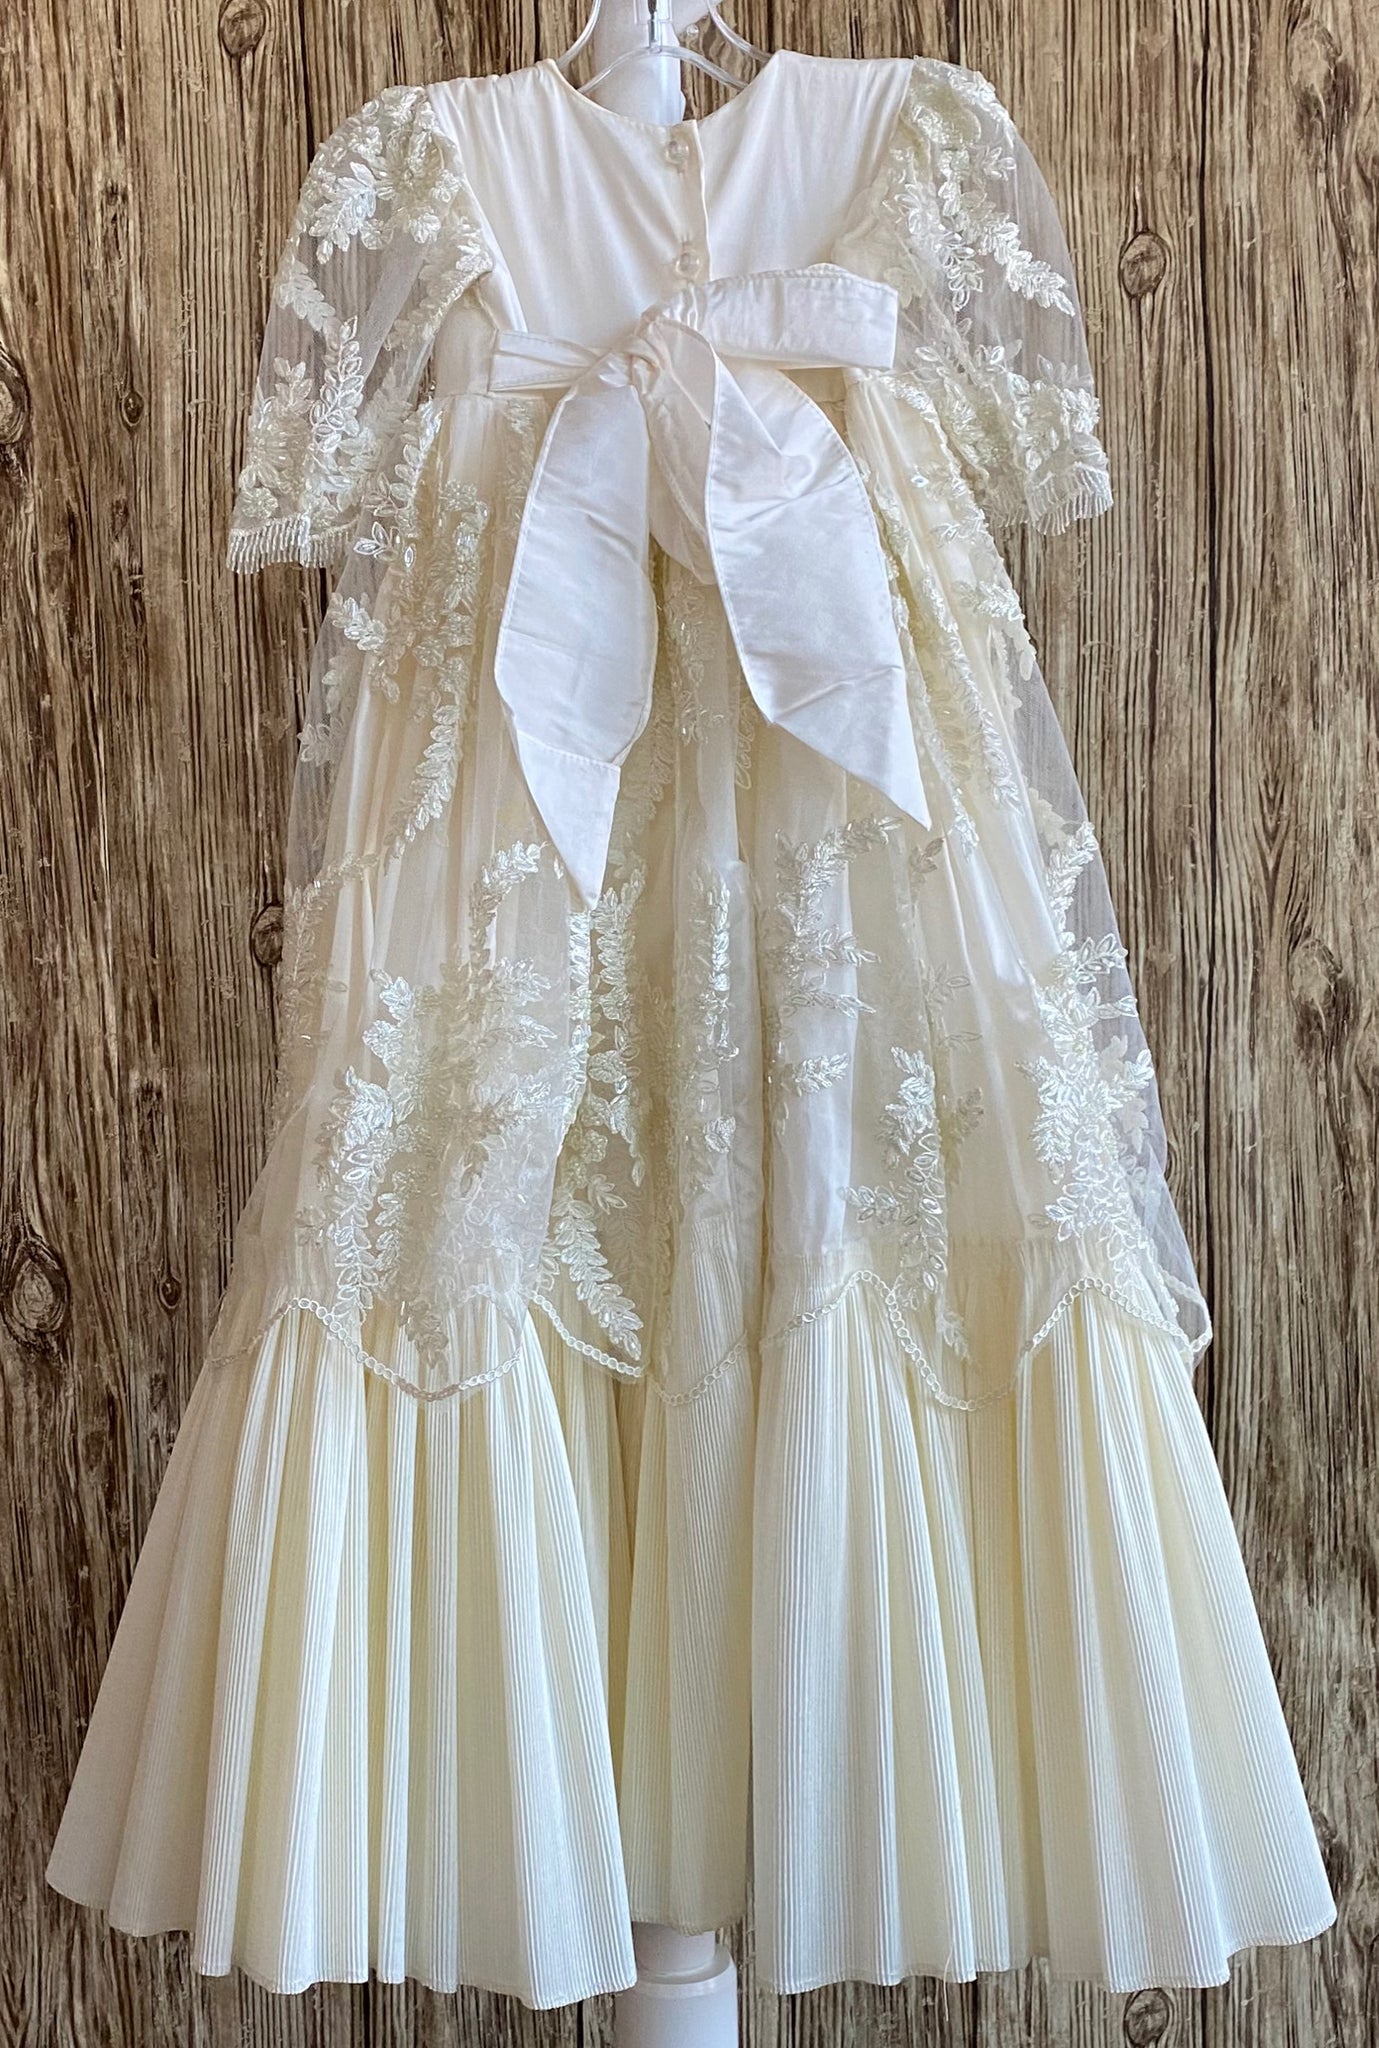 This a beautiful, one-of-a-kind baptism gown.  A lovely gown for a precious child.  Ivory, size 12M Embroidered beaded floral overlay on satin bodice Embroidered floral tulle half sleeve  Large rhinestone belt around bodice Long skirting with pleated ruffled bottom Embroidered beaded floral tulle overlay on skirt